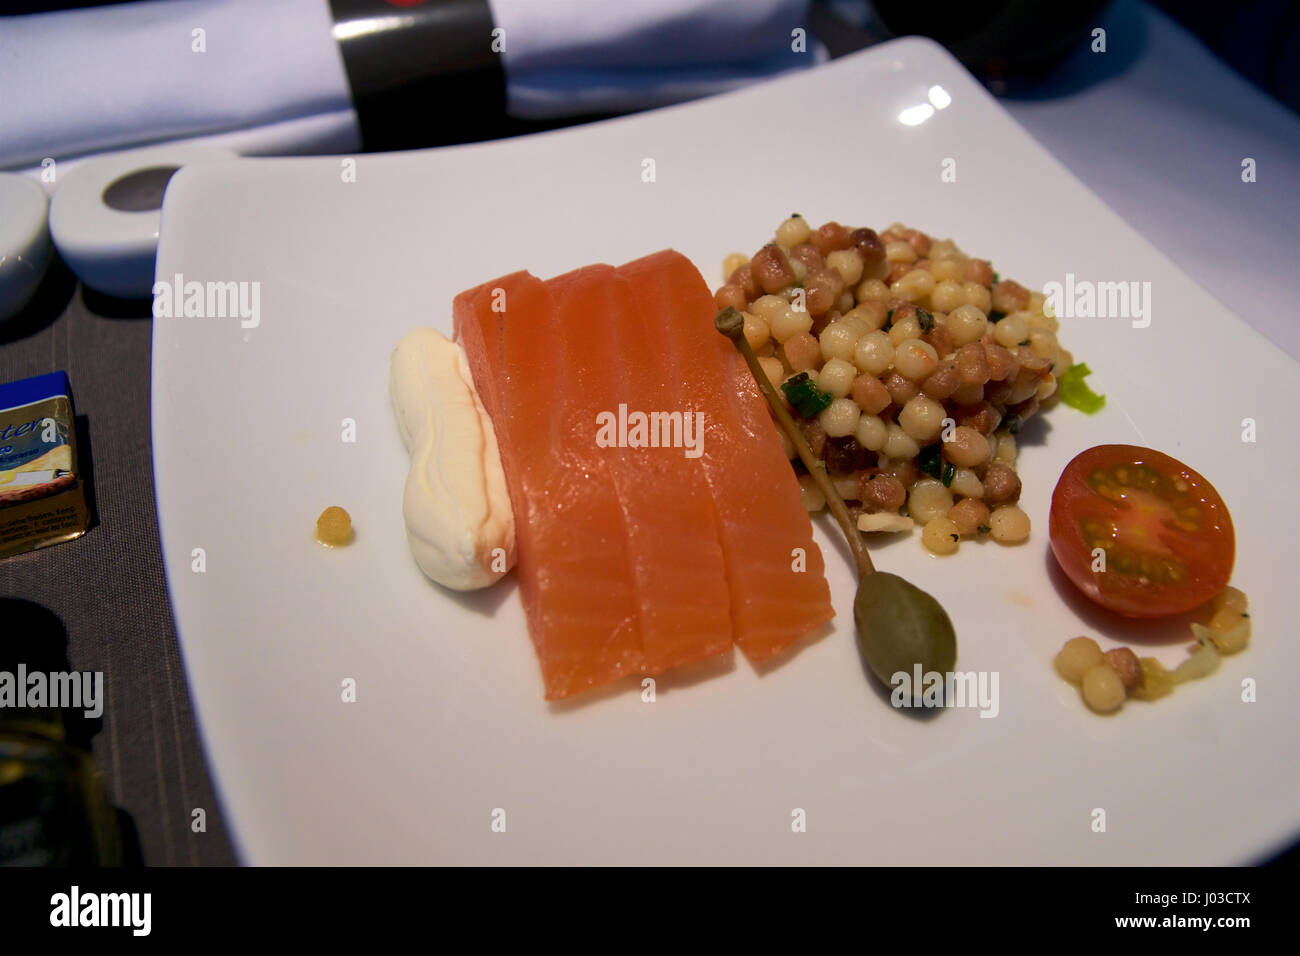 TORONTO, CANADA - JAN 21st, 2017: Air Canada Business Class in-flight meal, Smoked salmon with fregola salad as an appetizer Stock Photo